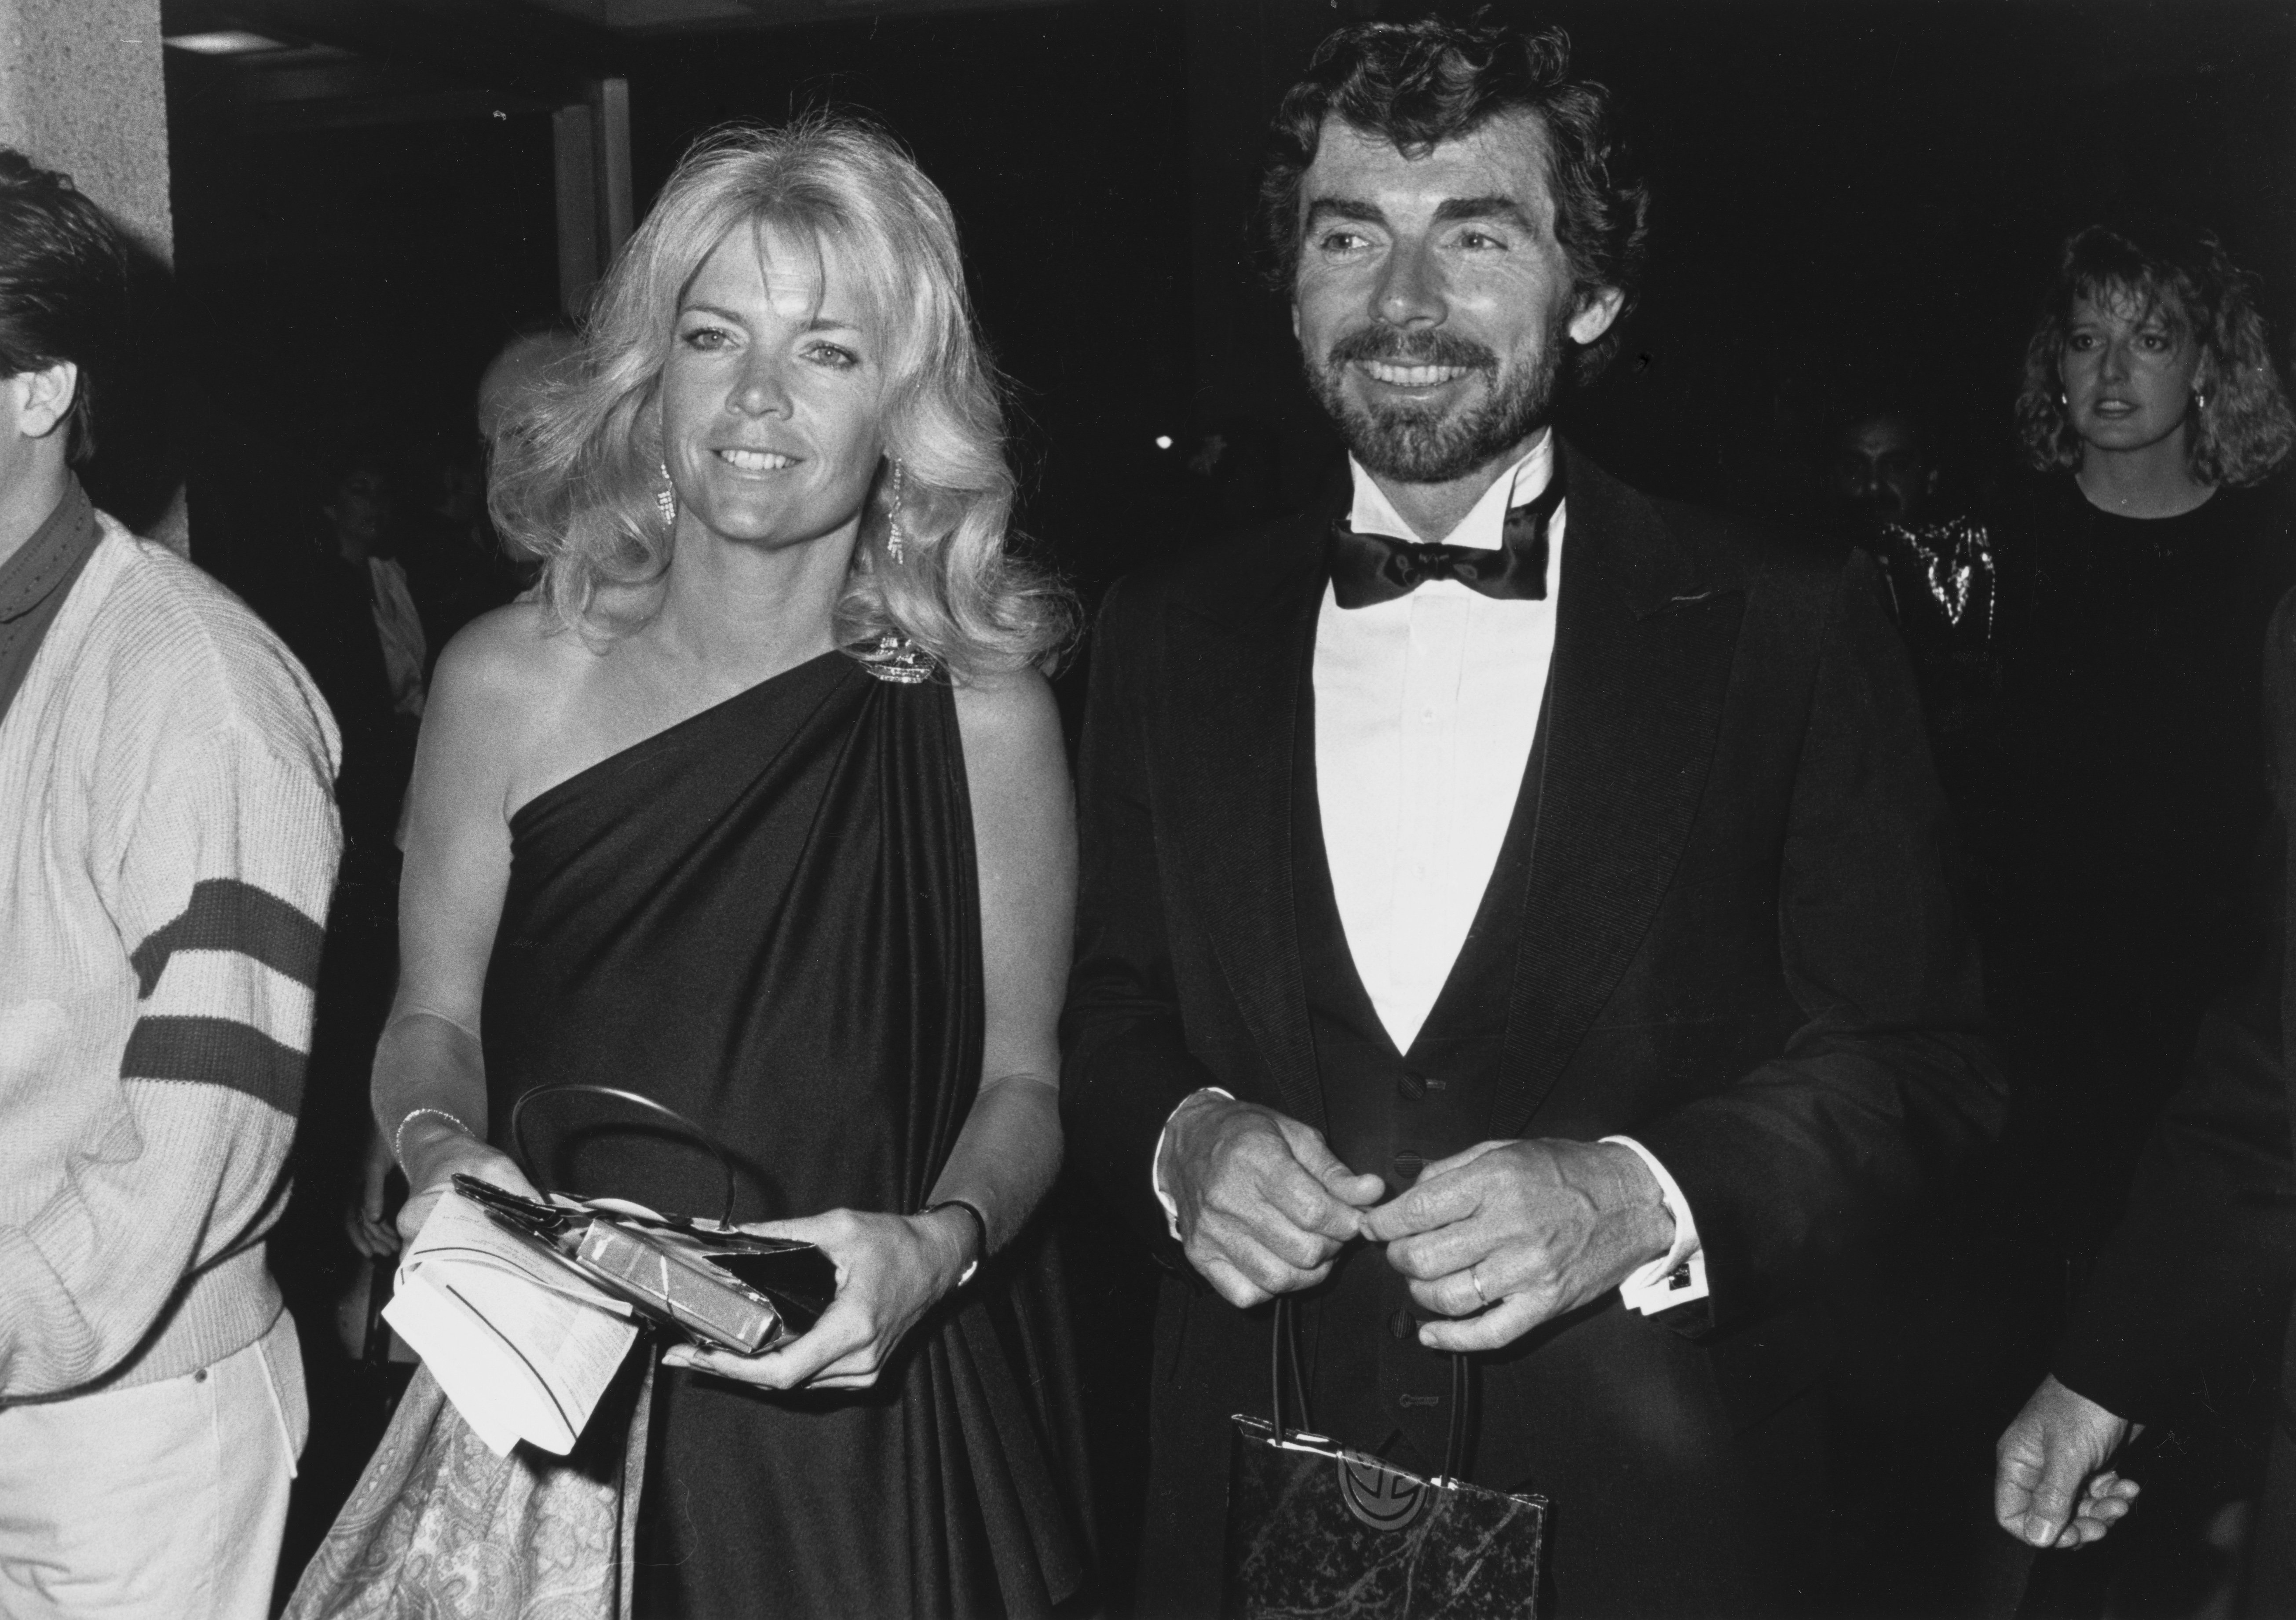 Meredith Baxter and David Birney at the Rudolph Valentino International Cinema & Television Awards on April 8, 1987 | Source: Getty Images